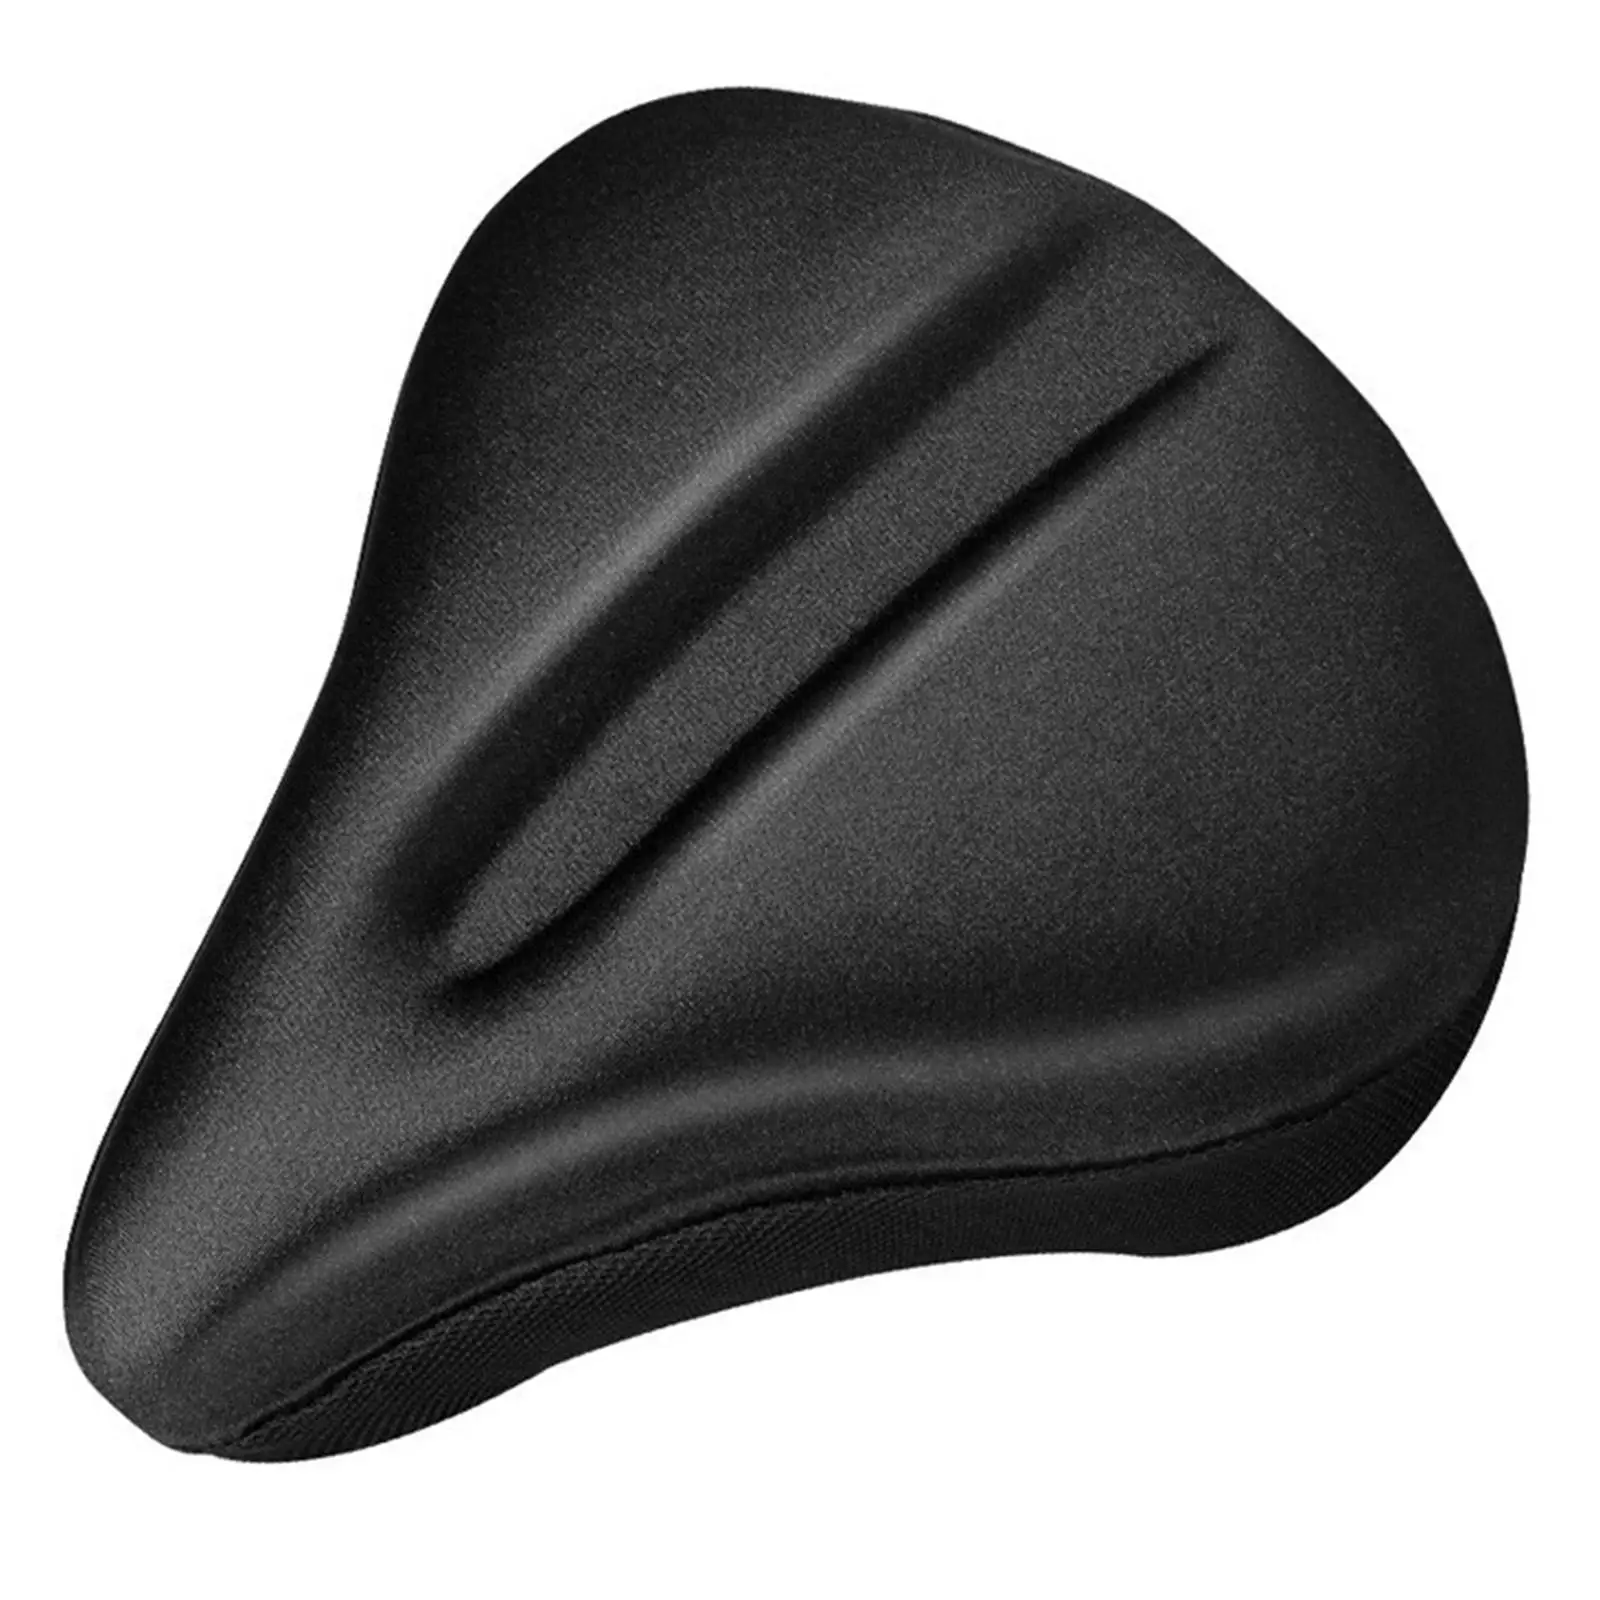 Bike Seat Cover Shock Absorption Thick Bike Saddle Seat Cover for Exercise Bike Road Bike Cycling Accessories Folding Bike Adult